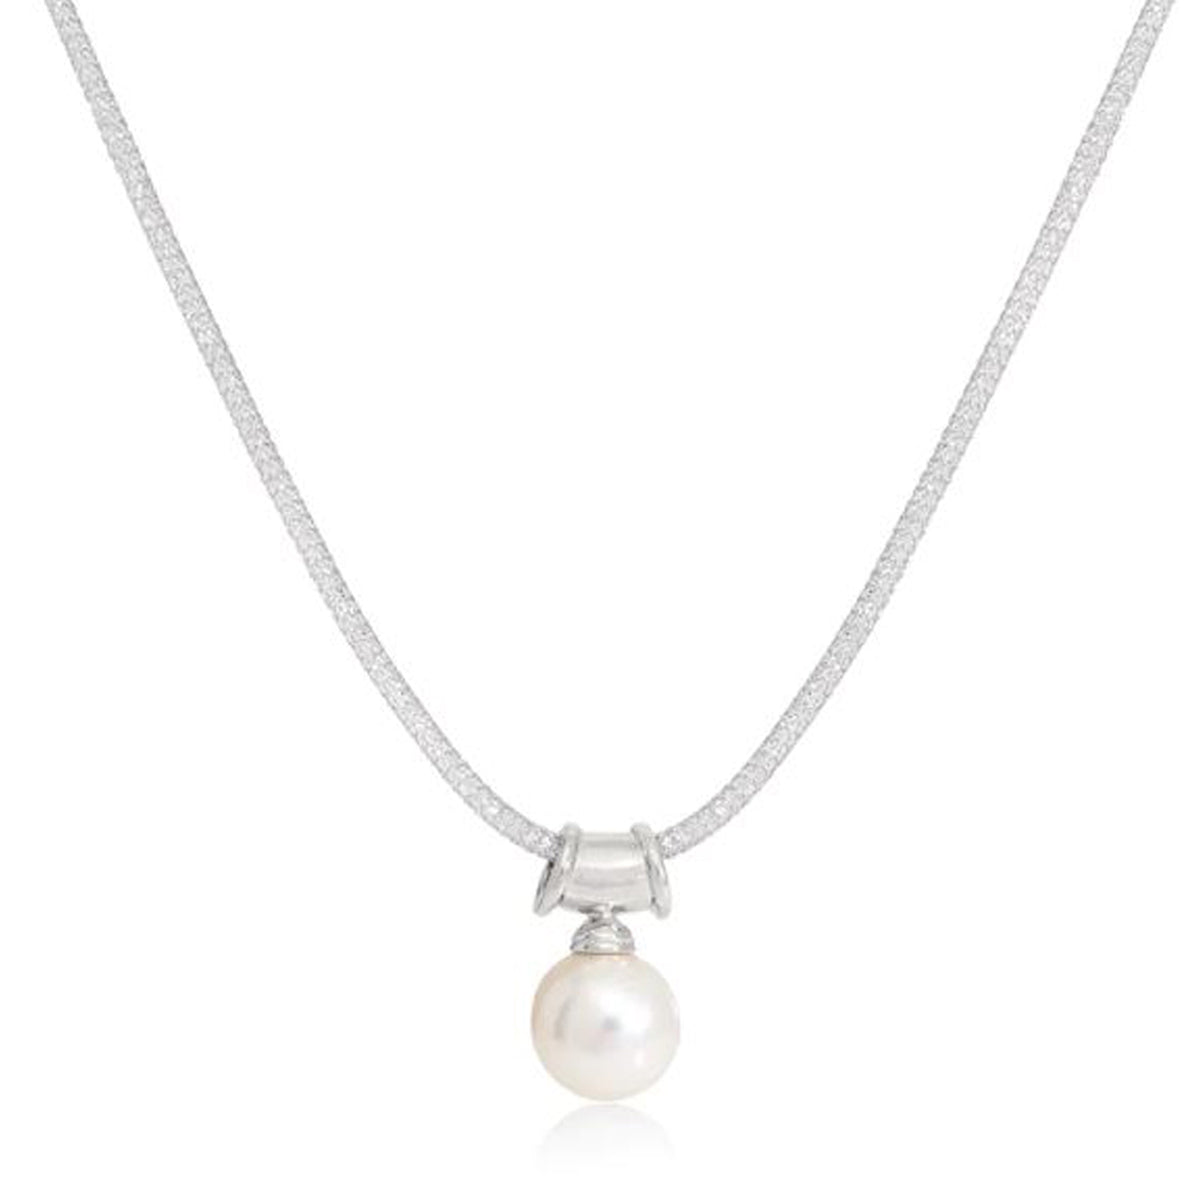 Silver Mesh Necklace & Large White Freshwater Pearl